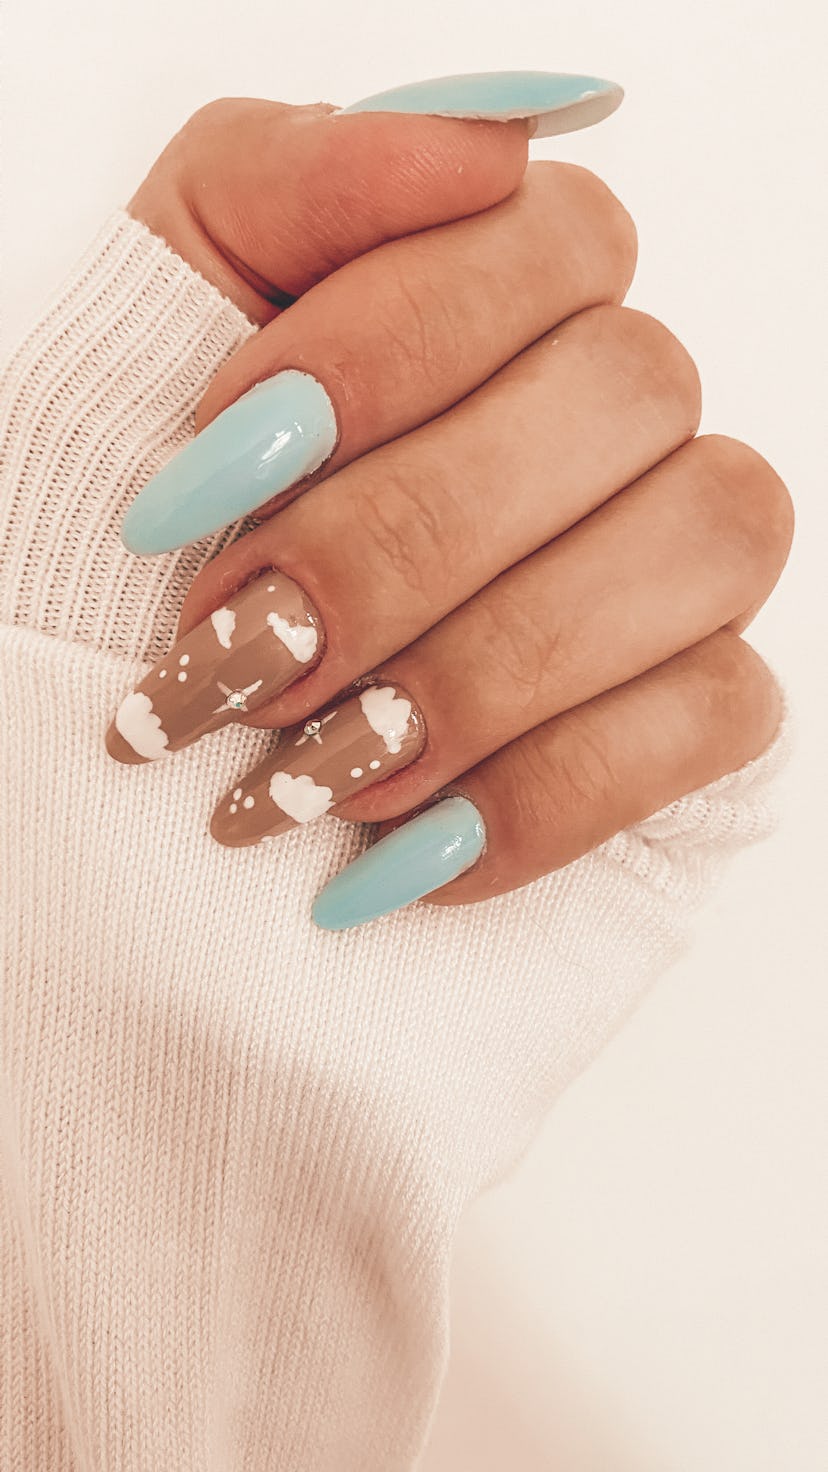 Cloud nail art with extension nails on nude and light blue nails, showcasing Libra nail designs.